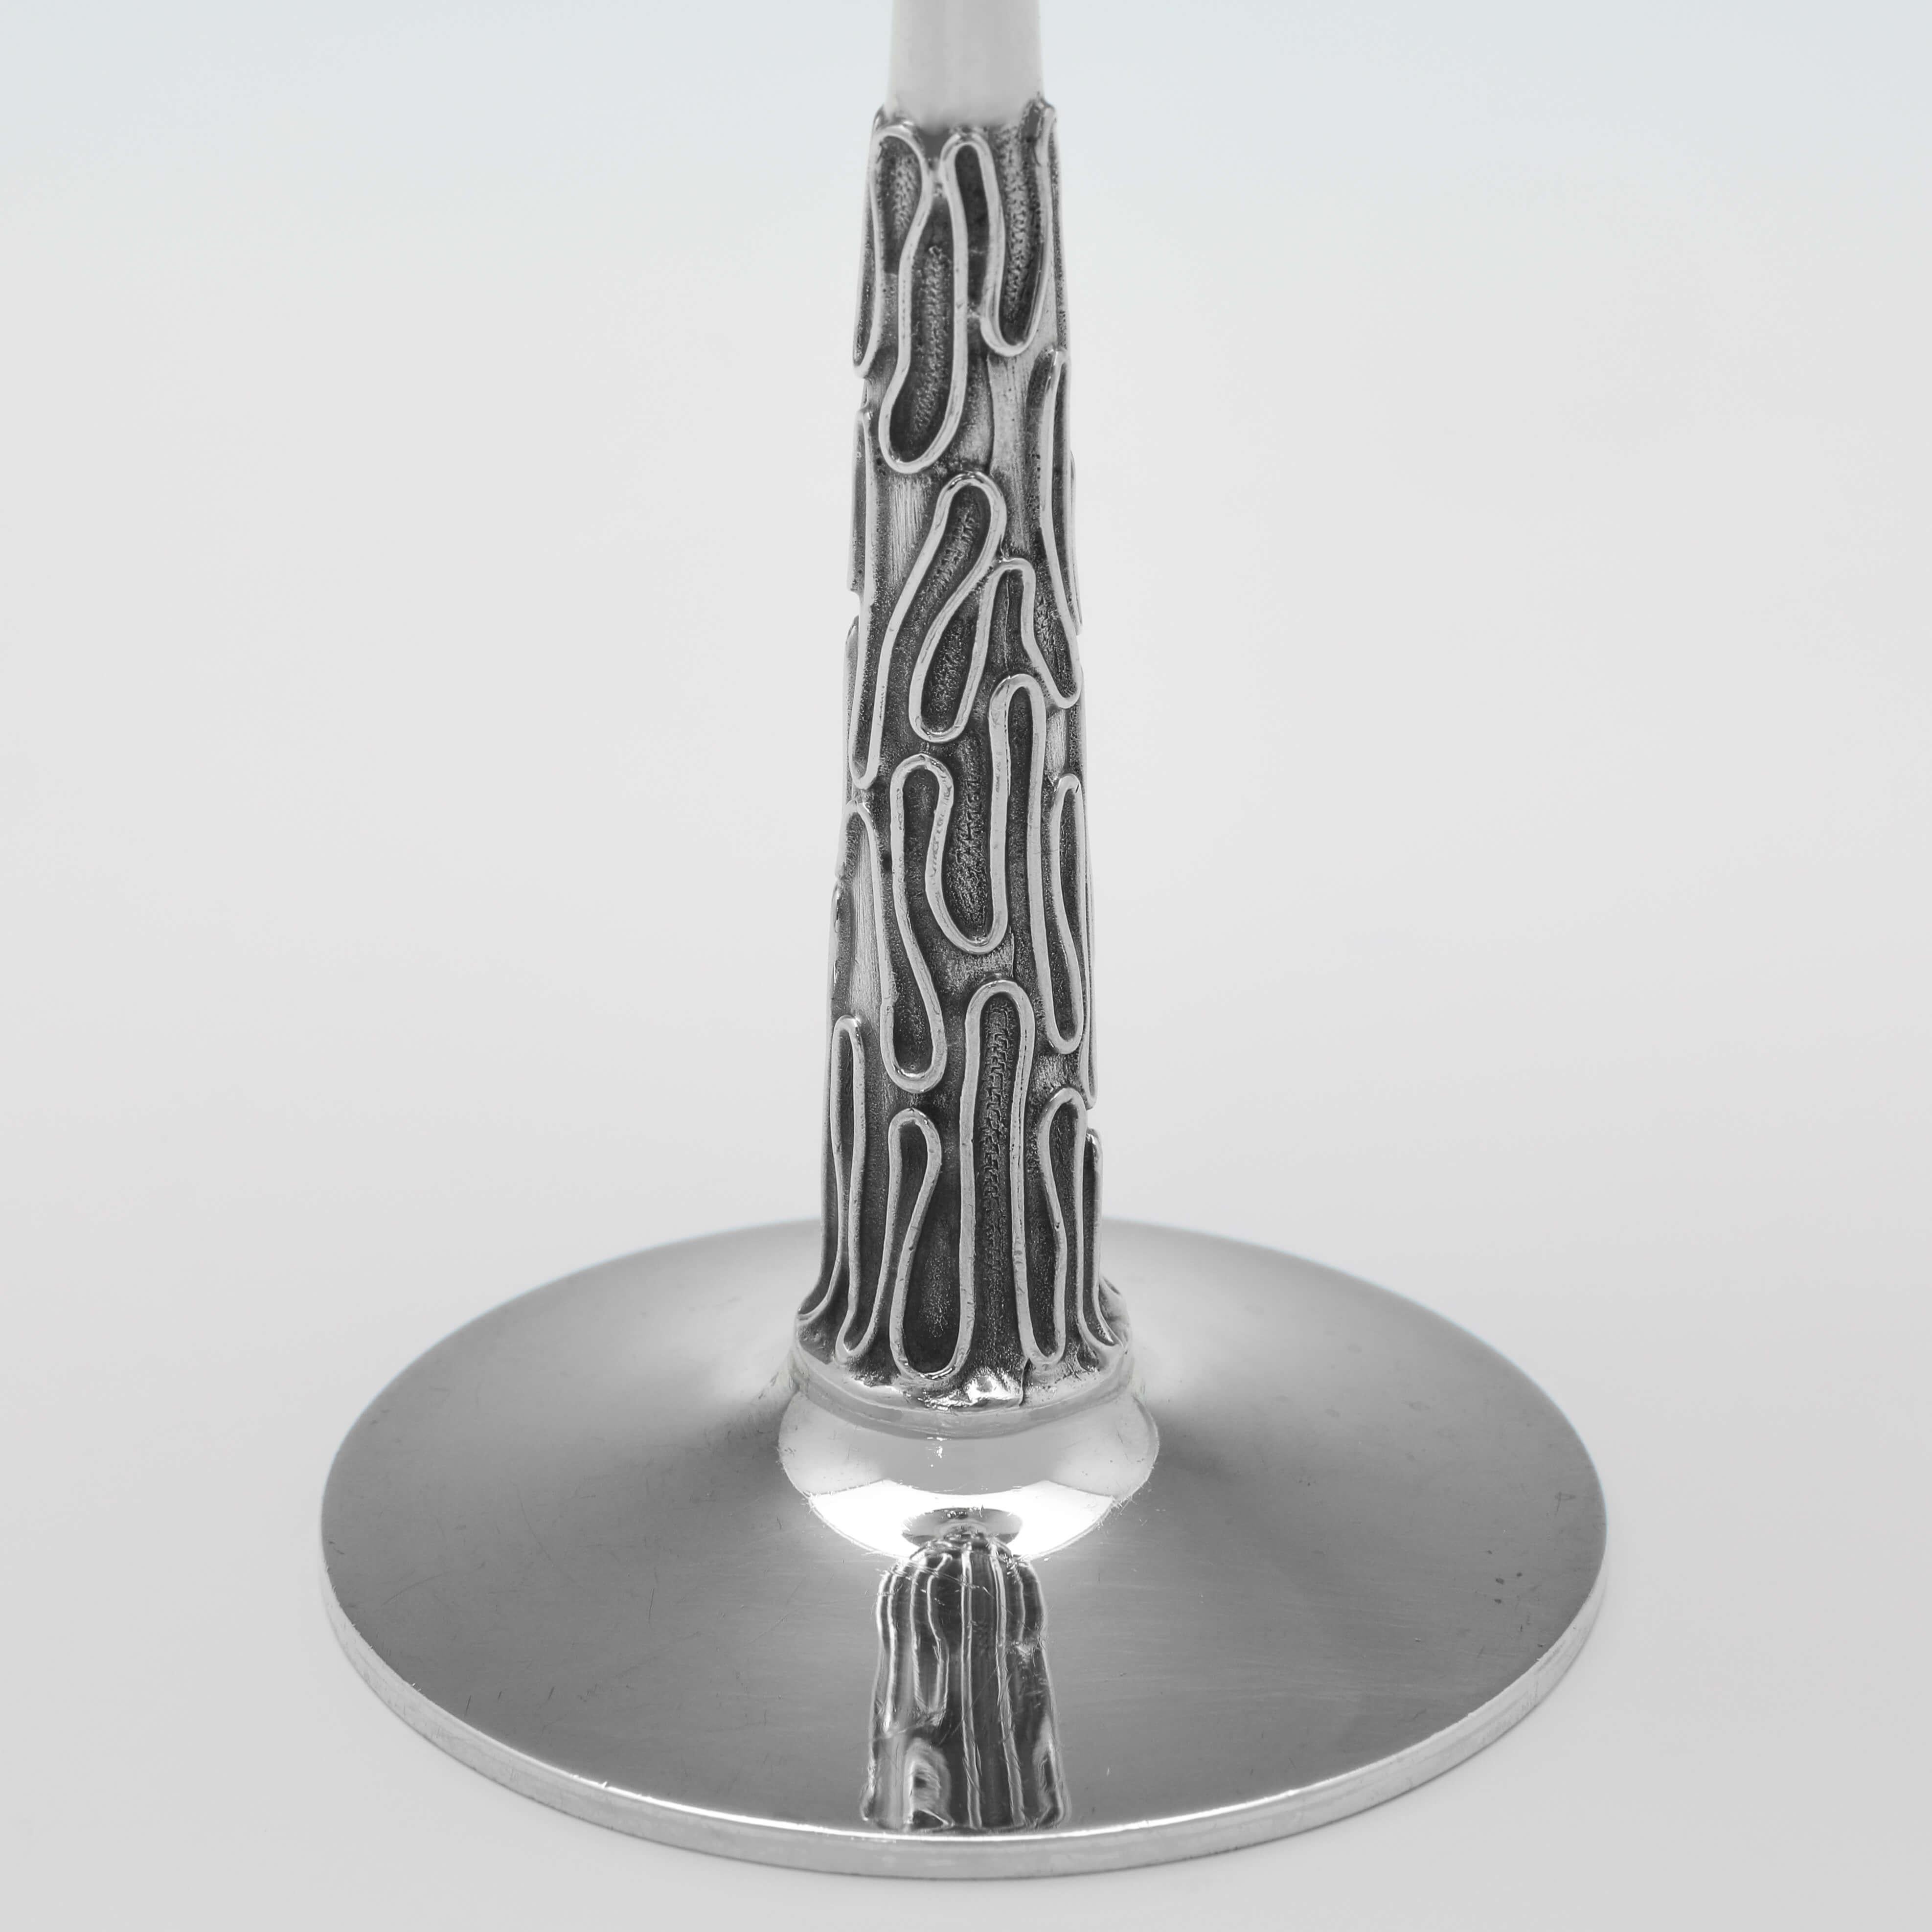 Late 20th Century Modernist Set of 8 Sterling Silver Wine Goblets, London 1978 George E. Grant For Sale